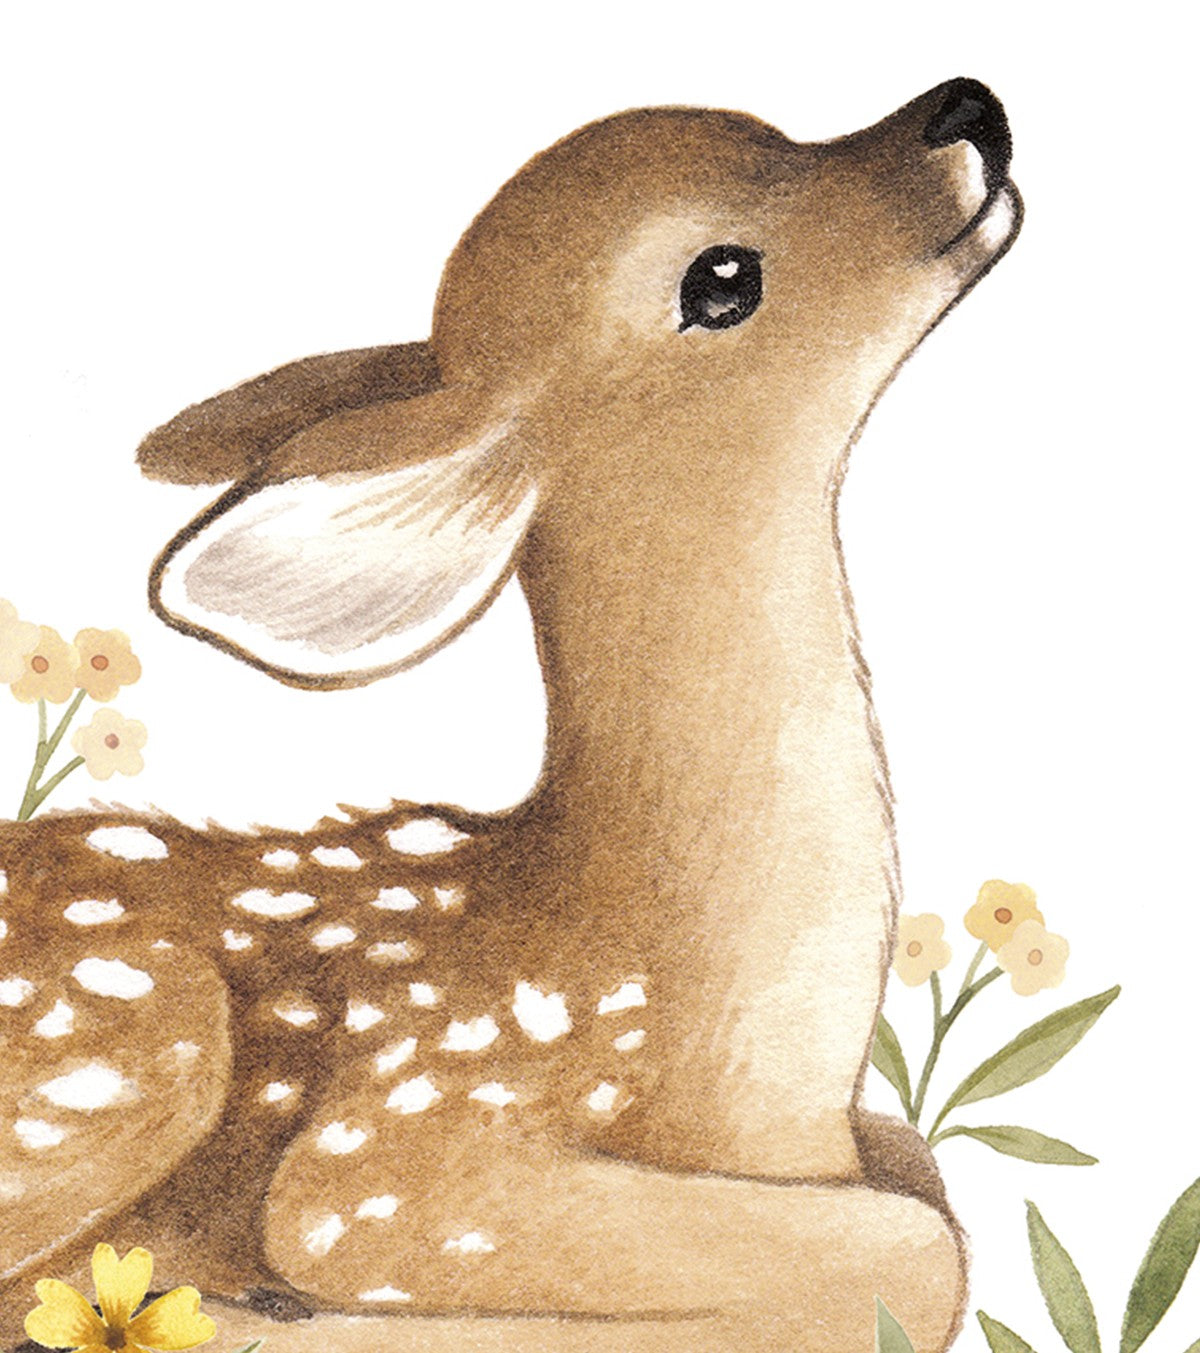 OH DEER - Poster per bambini - Vintage fawn